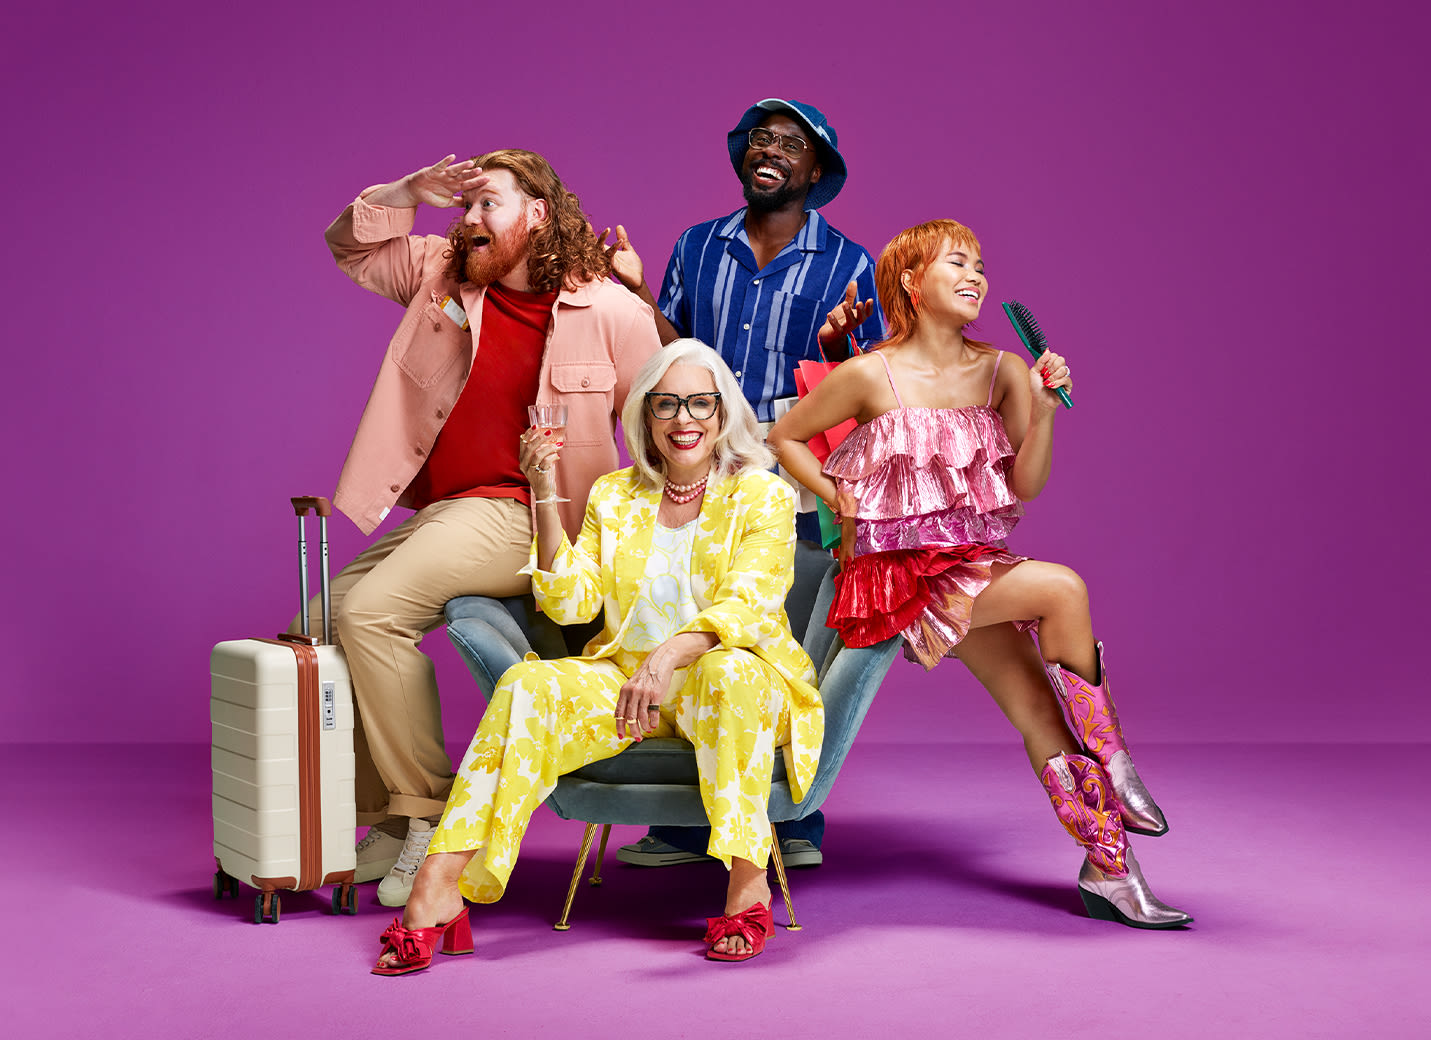 An image of a group of people in bright clothing